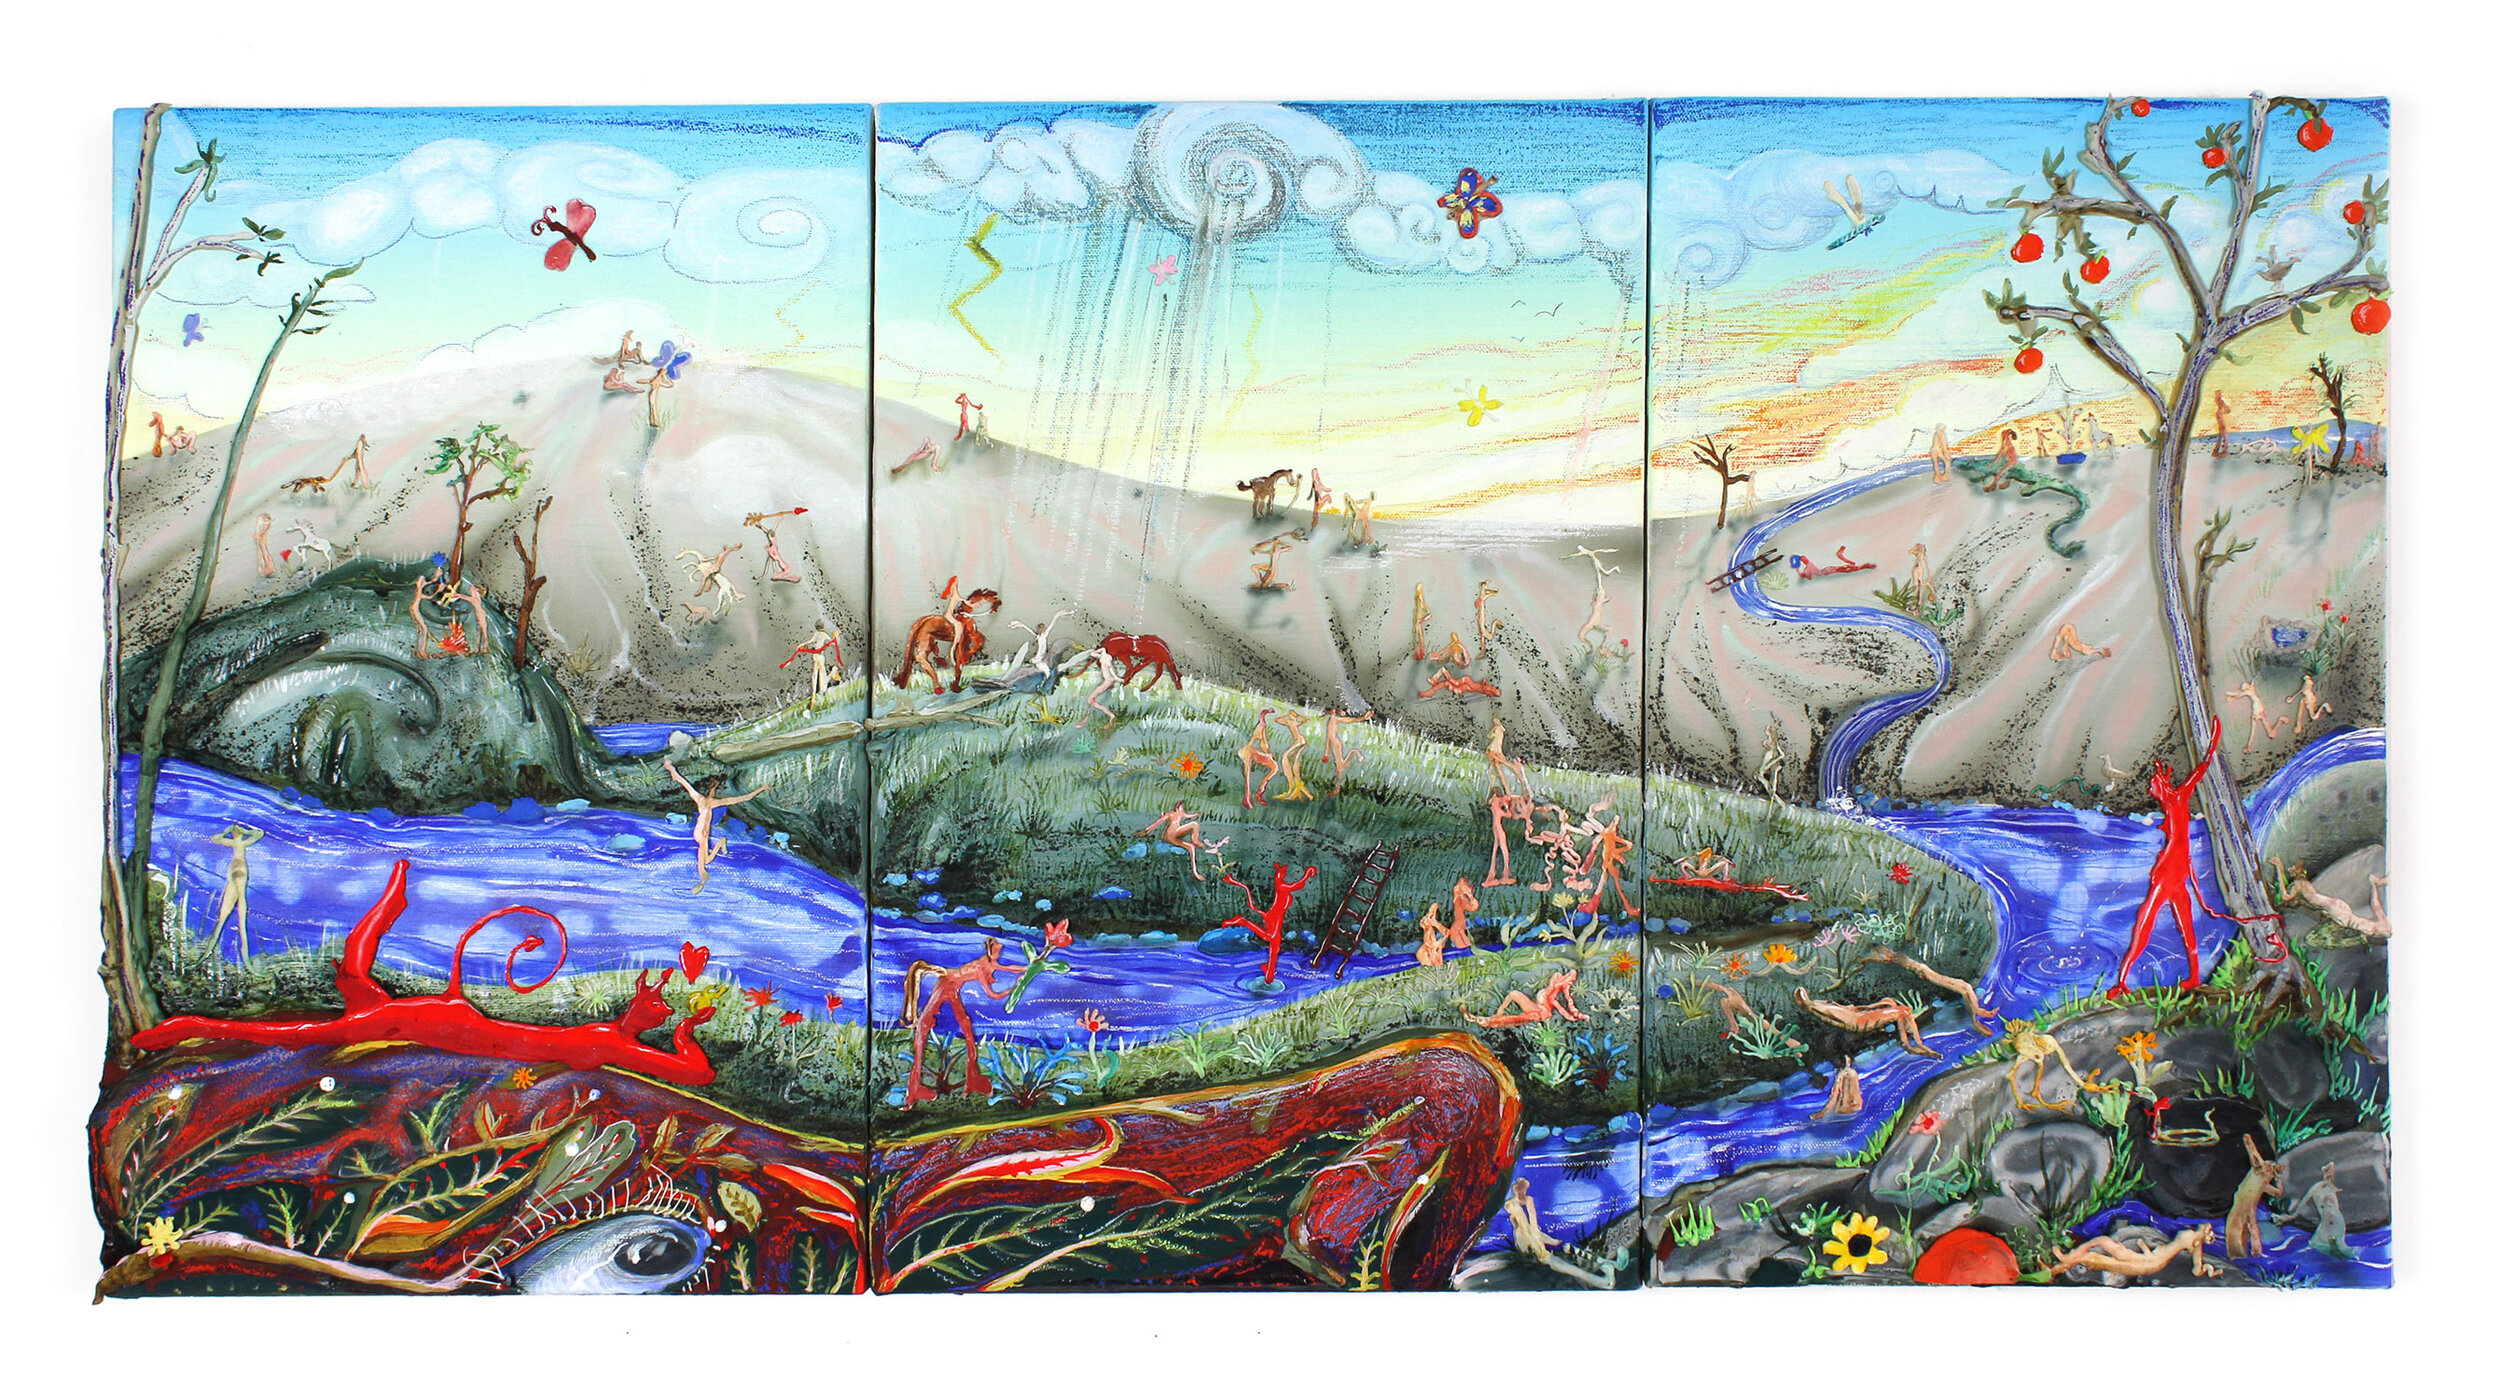   Halfway Under Water , 2020 .  Acrylic, vinyl, sand, pumice, watercolor, oil pastel on canvas, 33 x 17 x 1 in. (83.8 x 43.2 x 2.6 cm) 